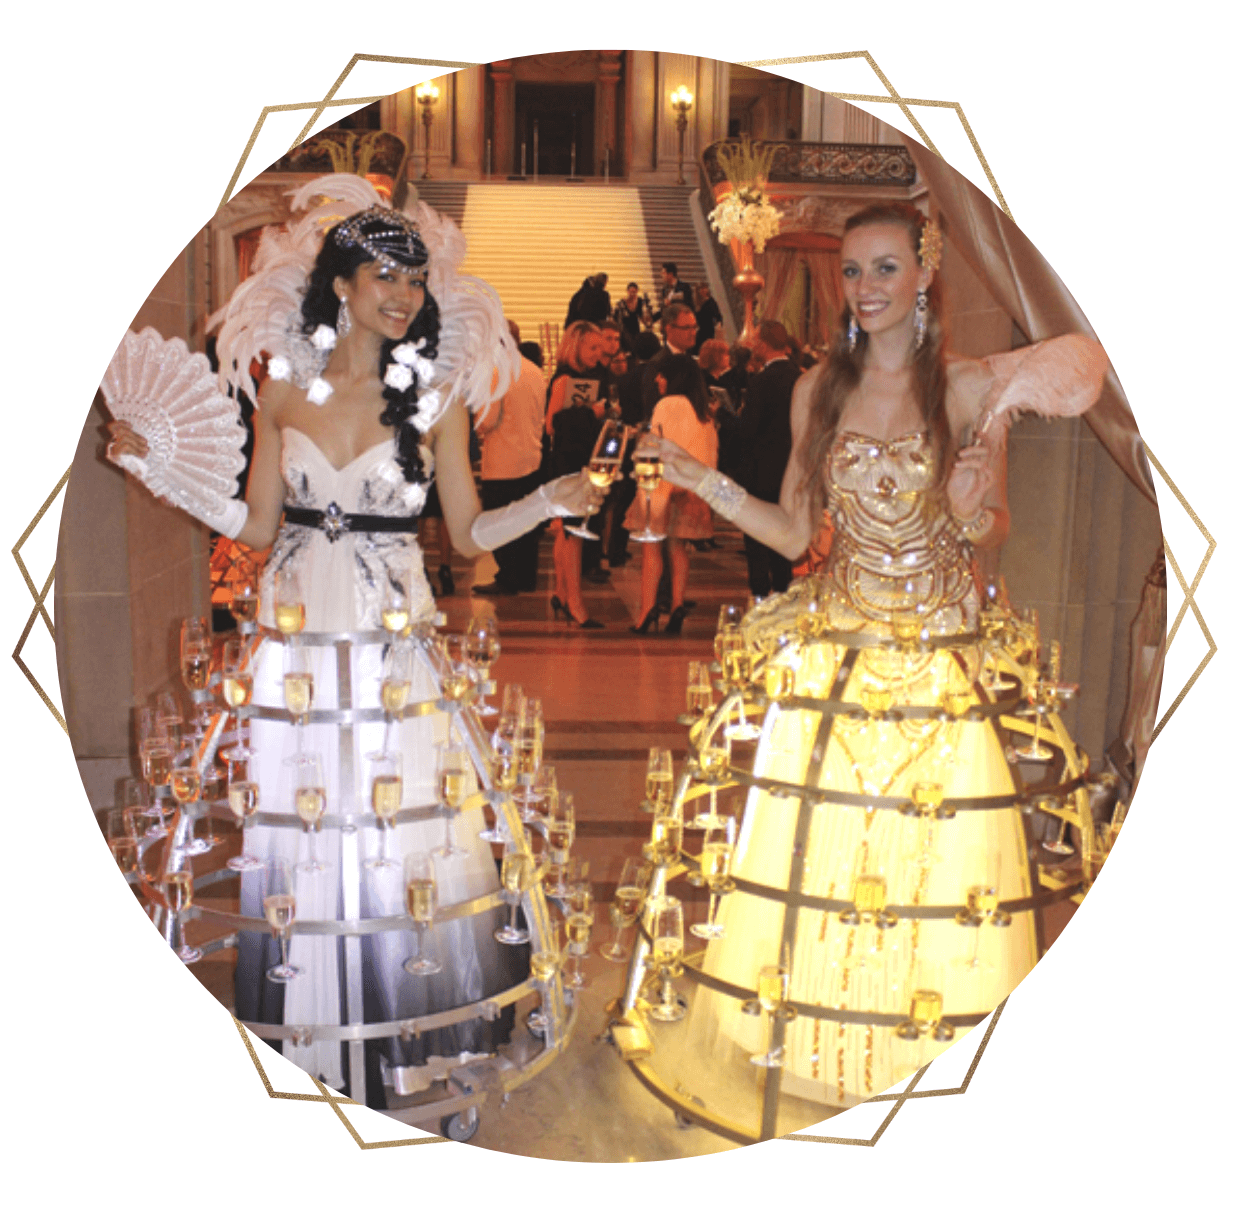 Champagne Skirts by Catalyst Arts + Drink Dresses in San Francisco Bay Area